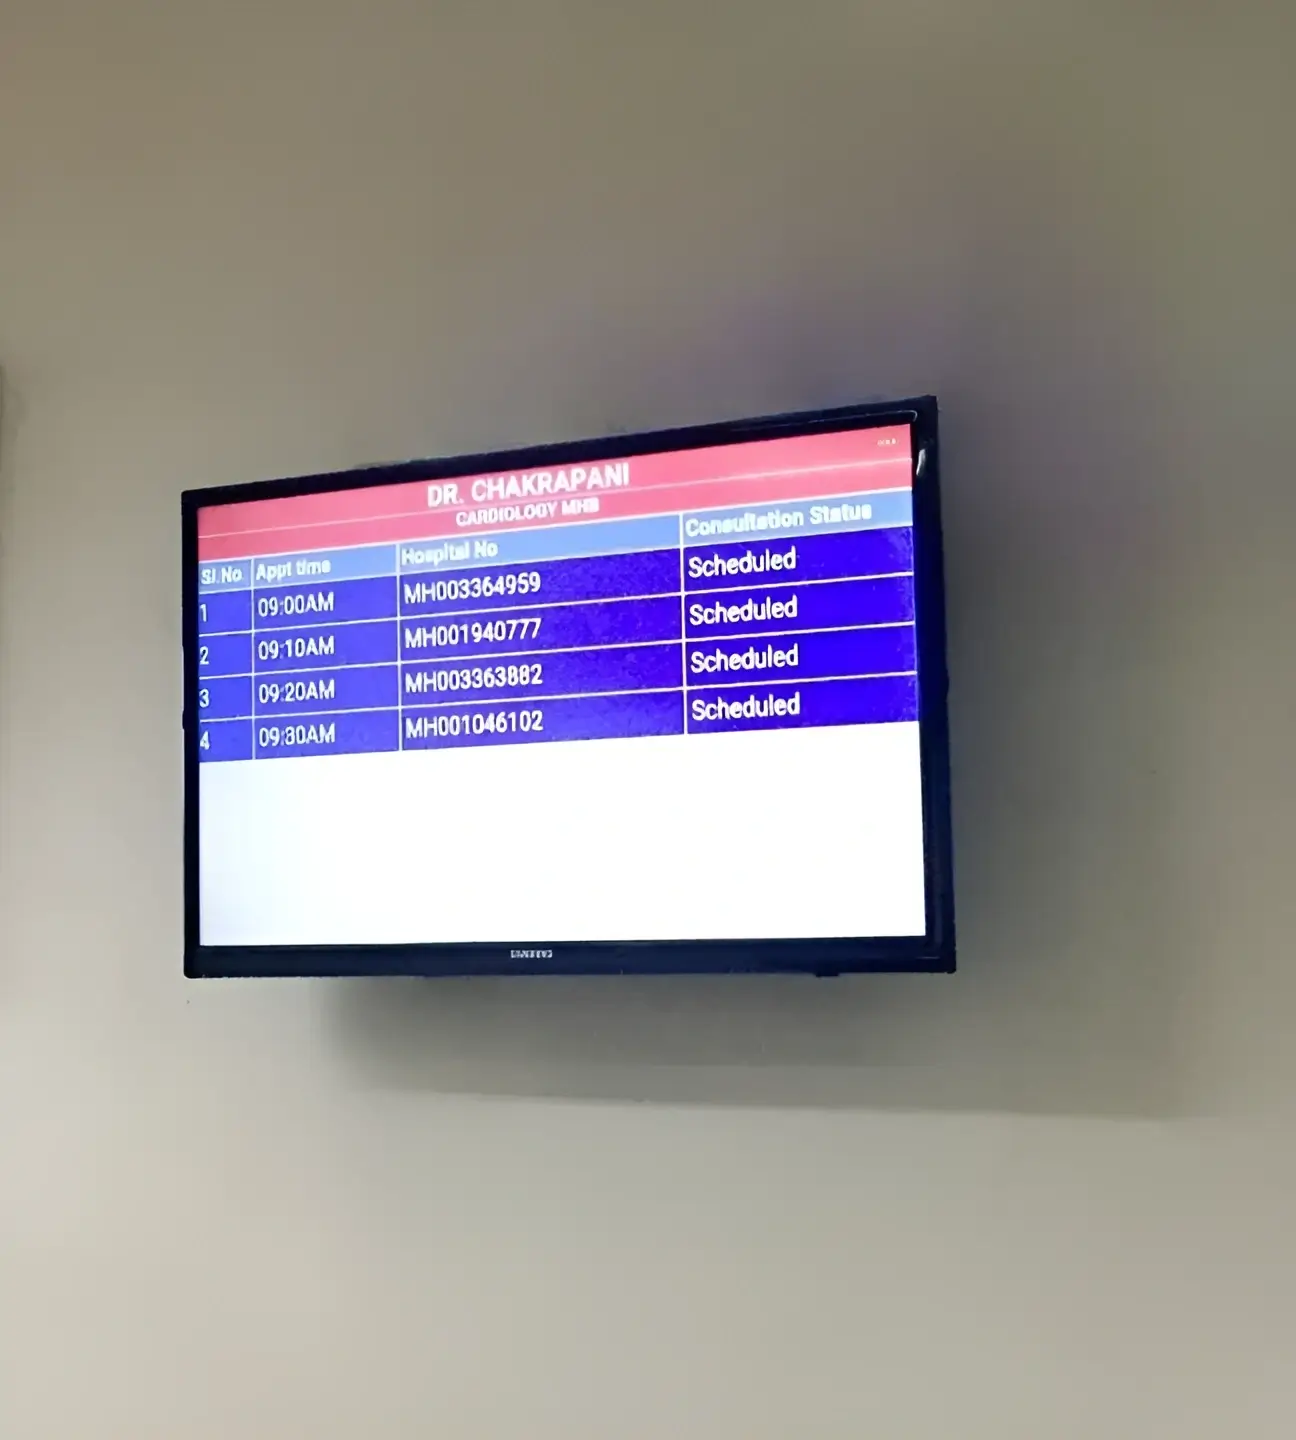 Digital signage content playing on a display at hospital lobby which is powered by Pickcel